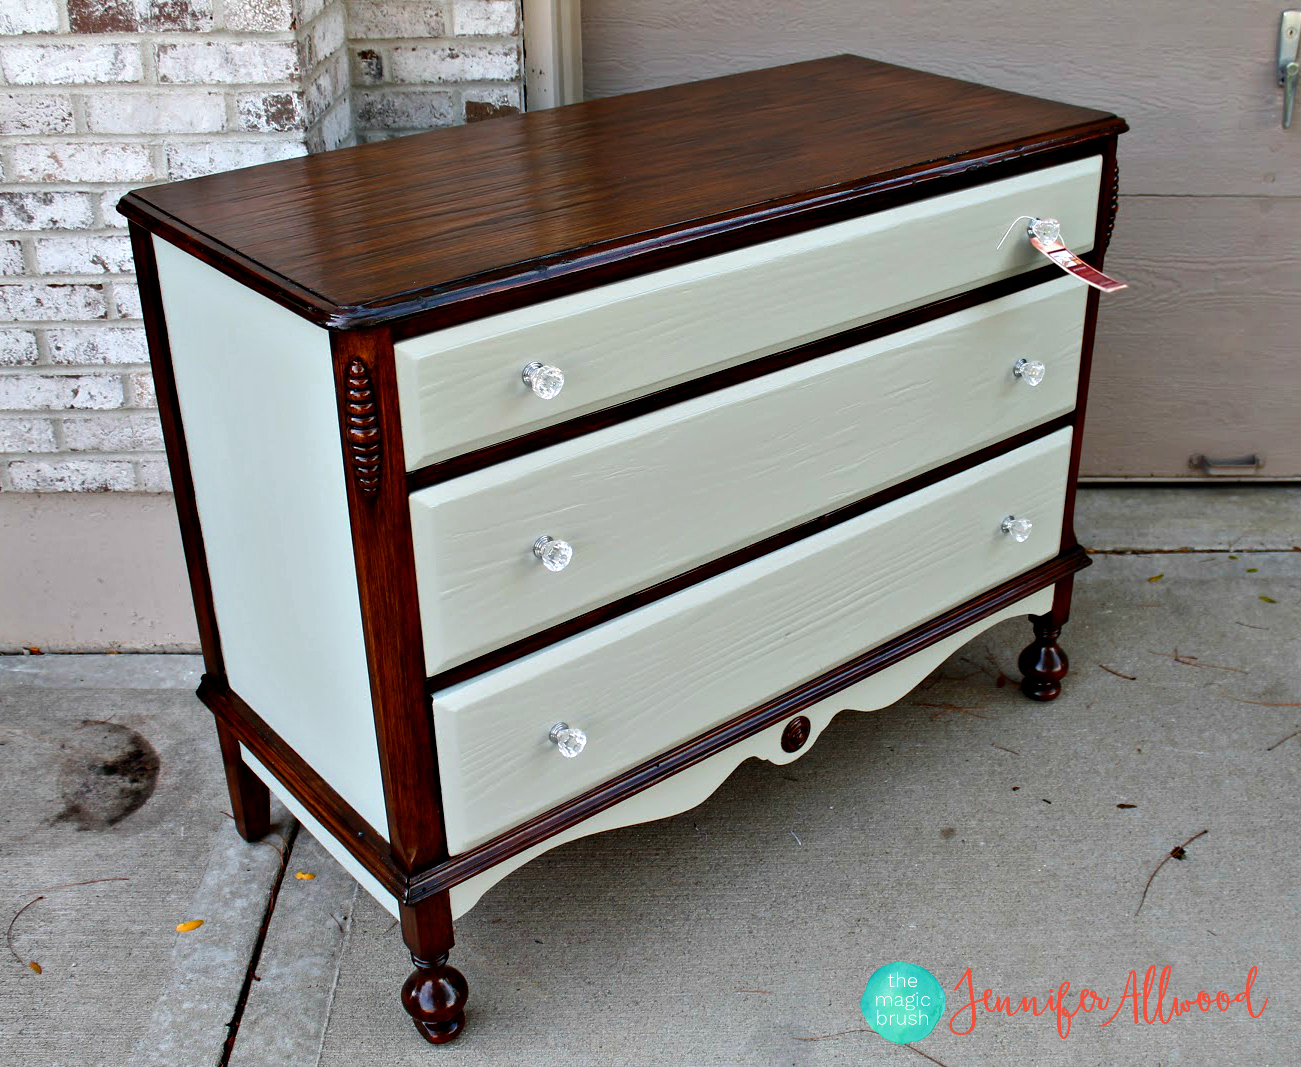 My new favorite dresser – a mix of paint and stain